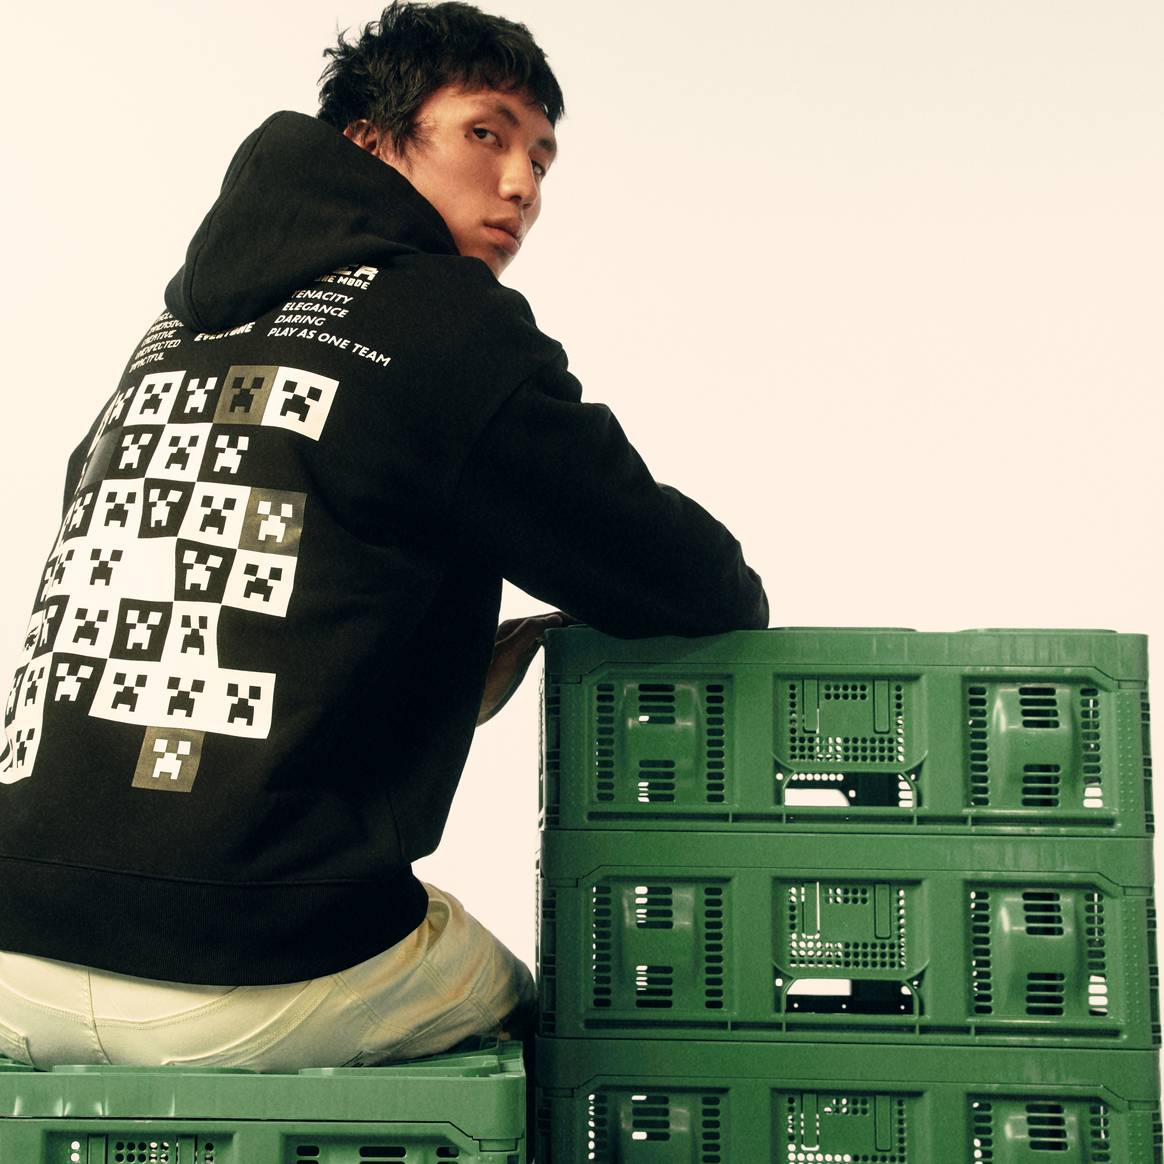 Build the Perfect Wardrobe with the Minecraft x Lacoste Collection - The  Pop Insider